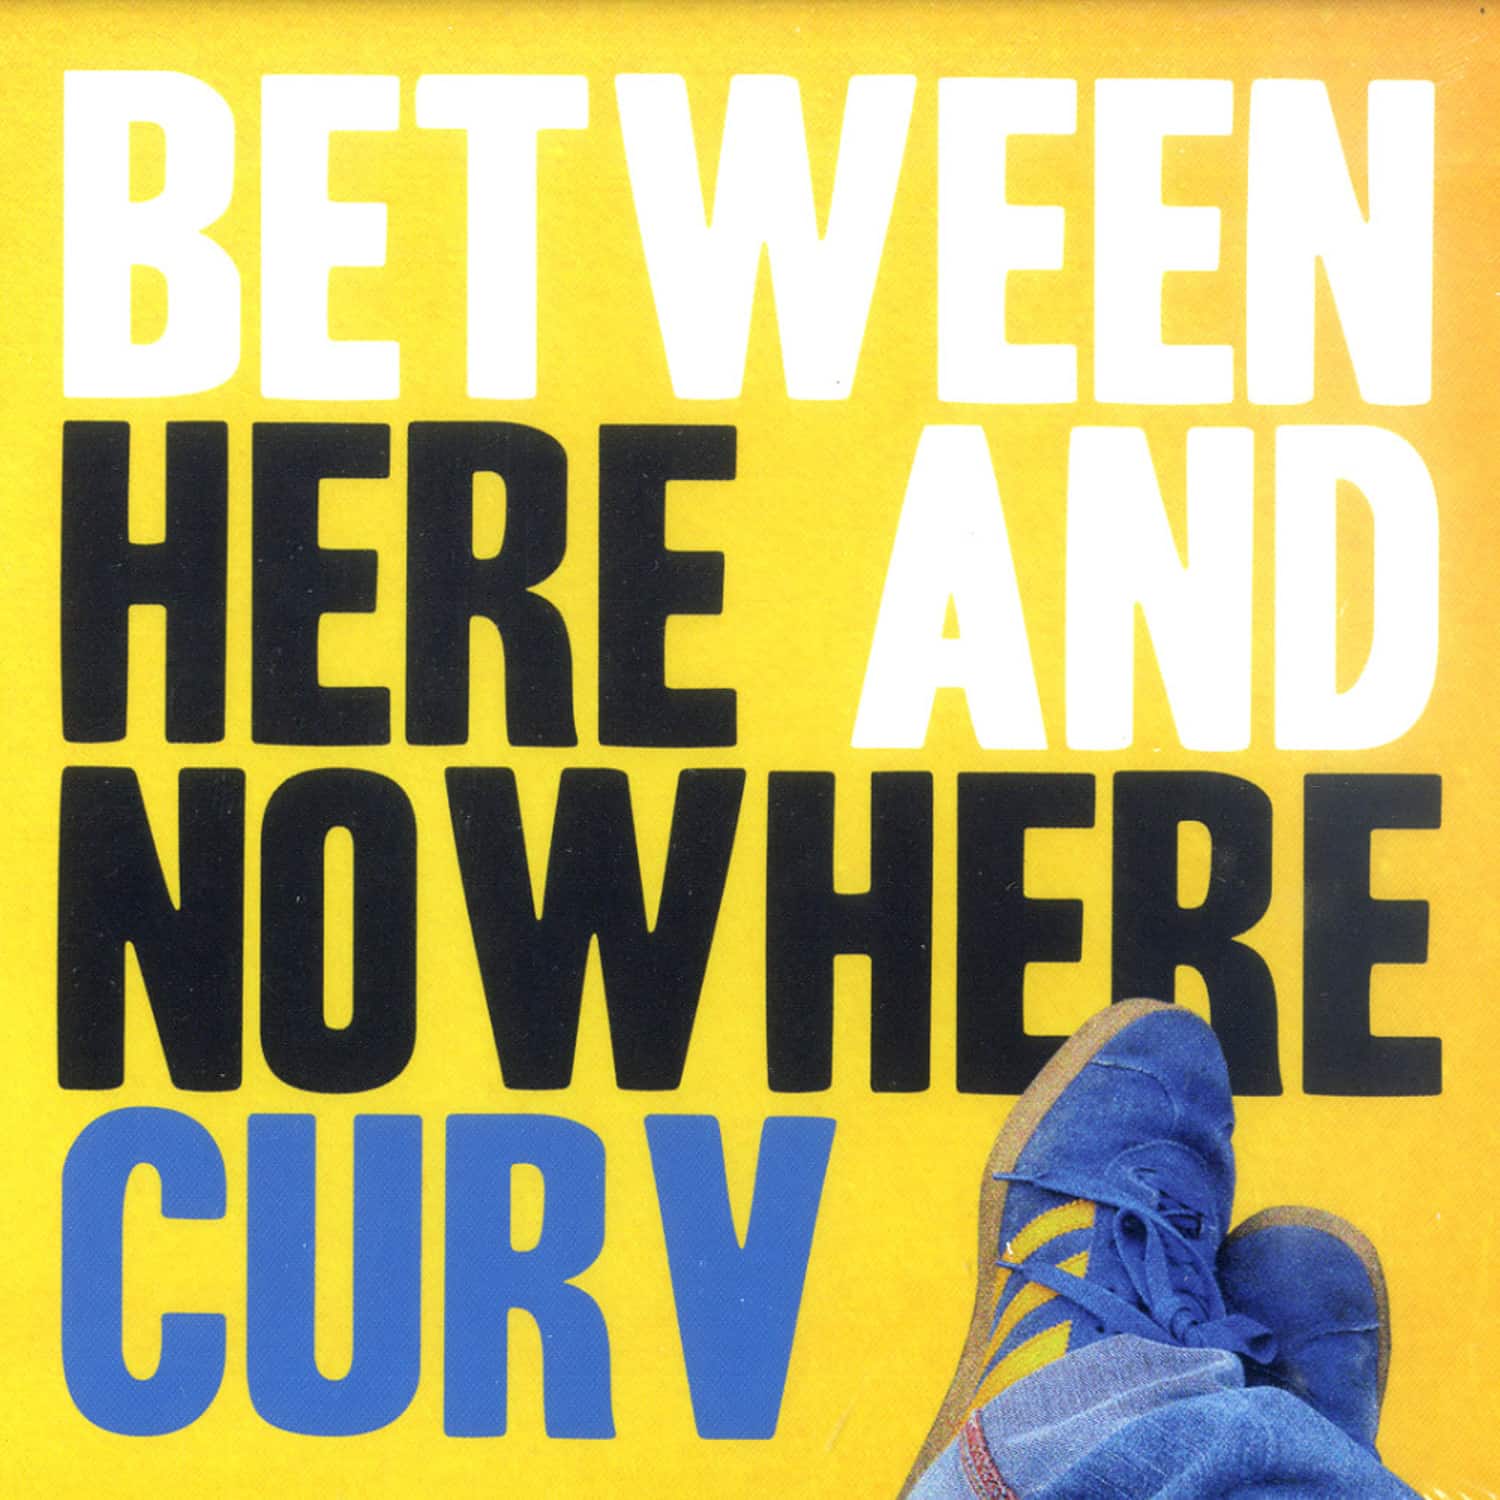 Curv - BETWEEN HERE AND NOWHERE 